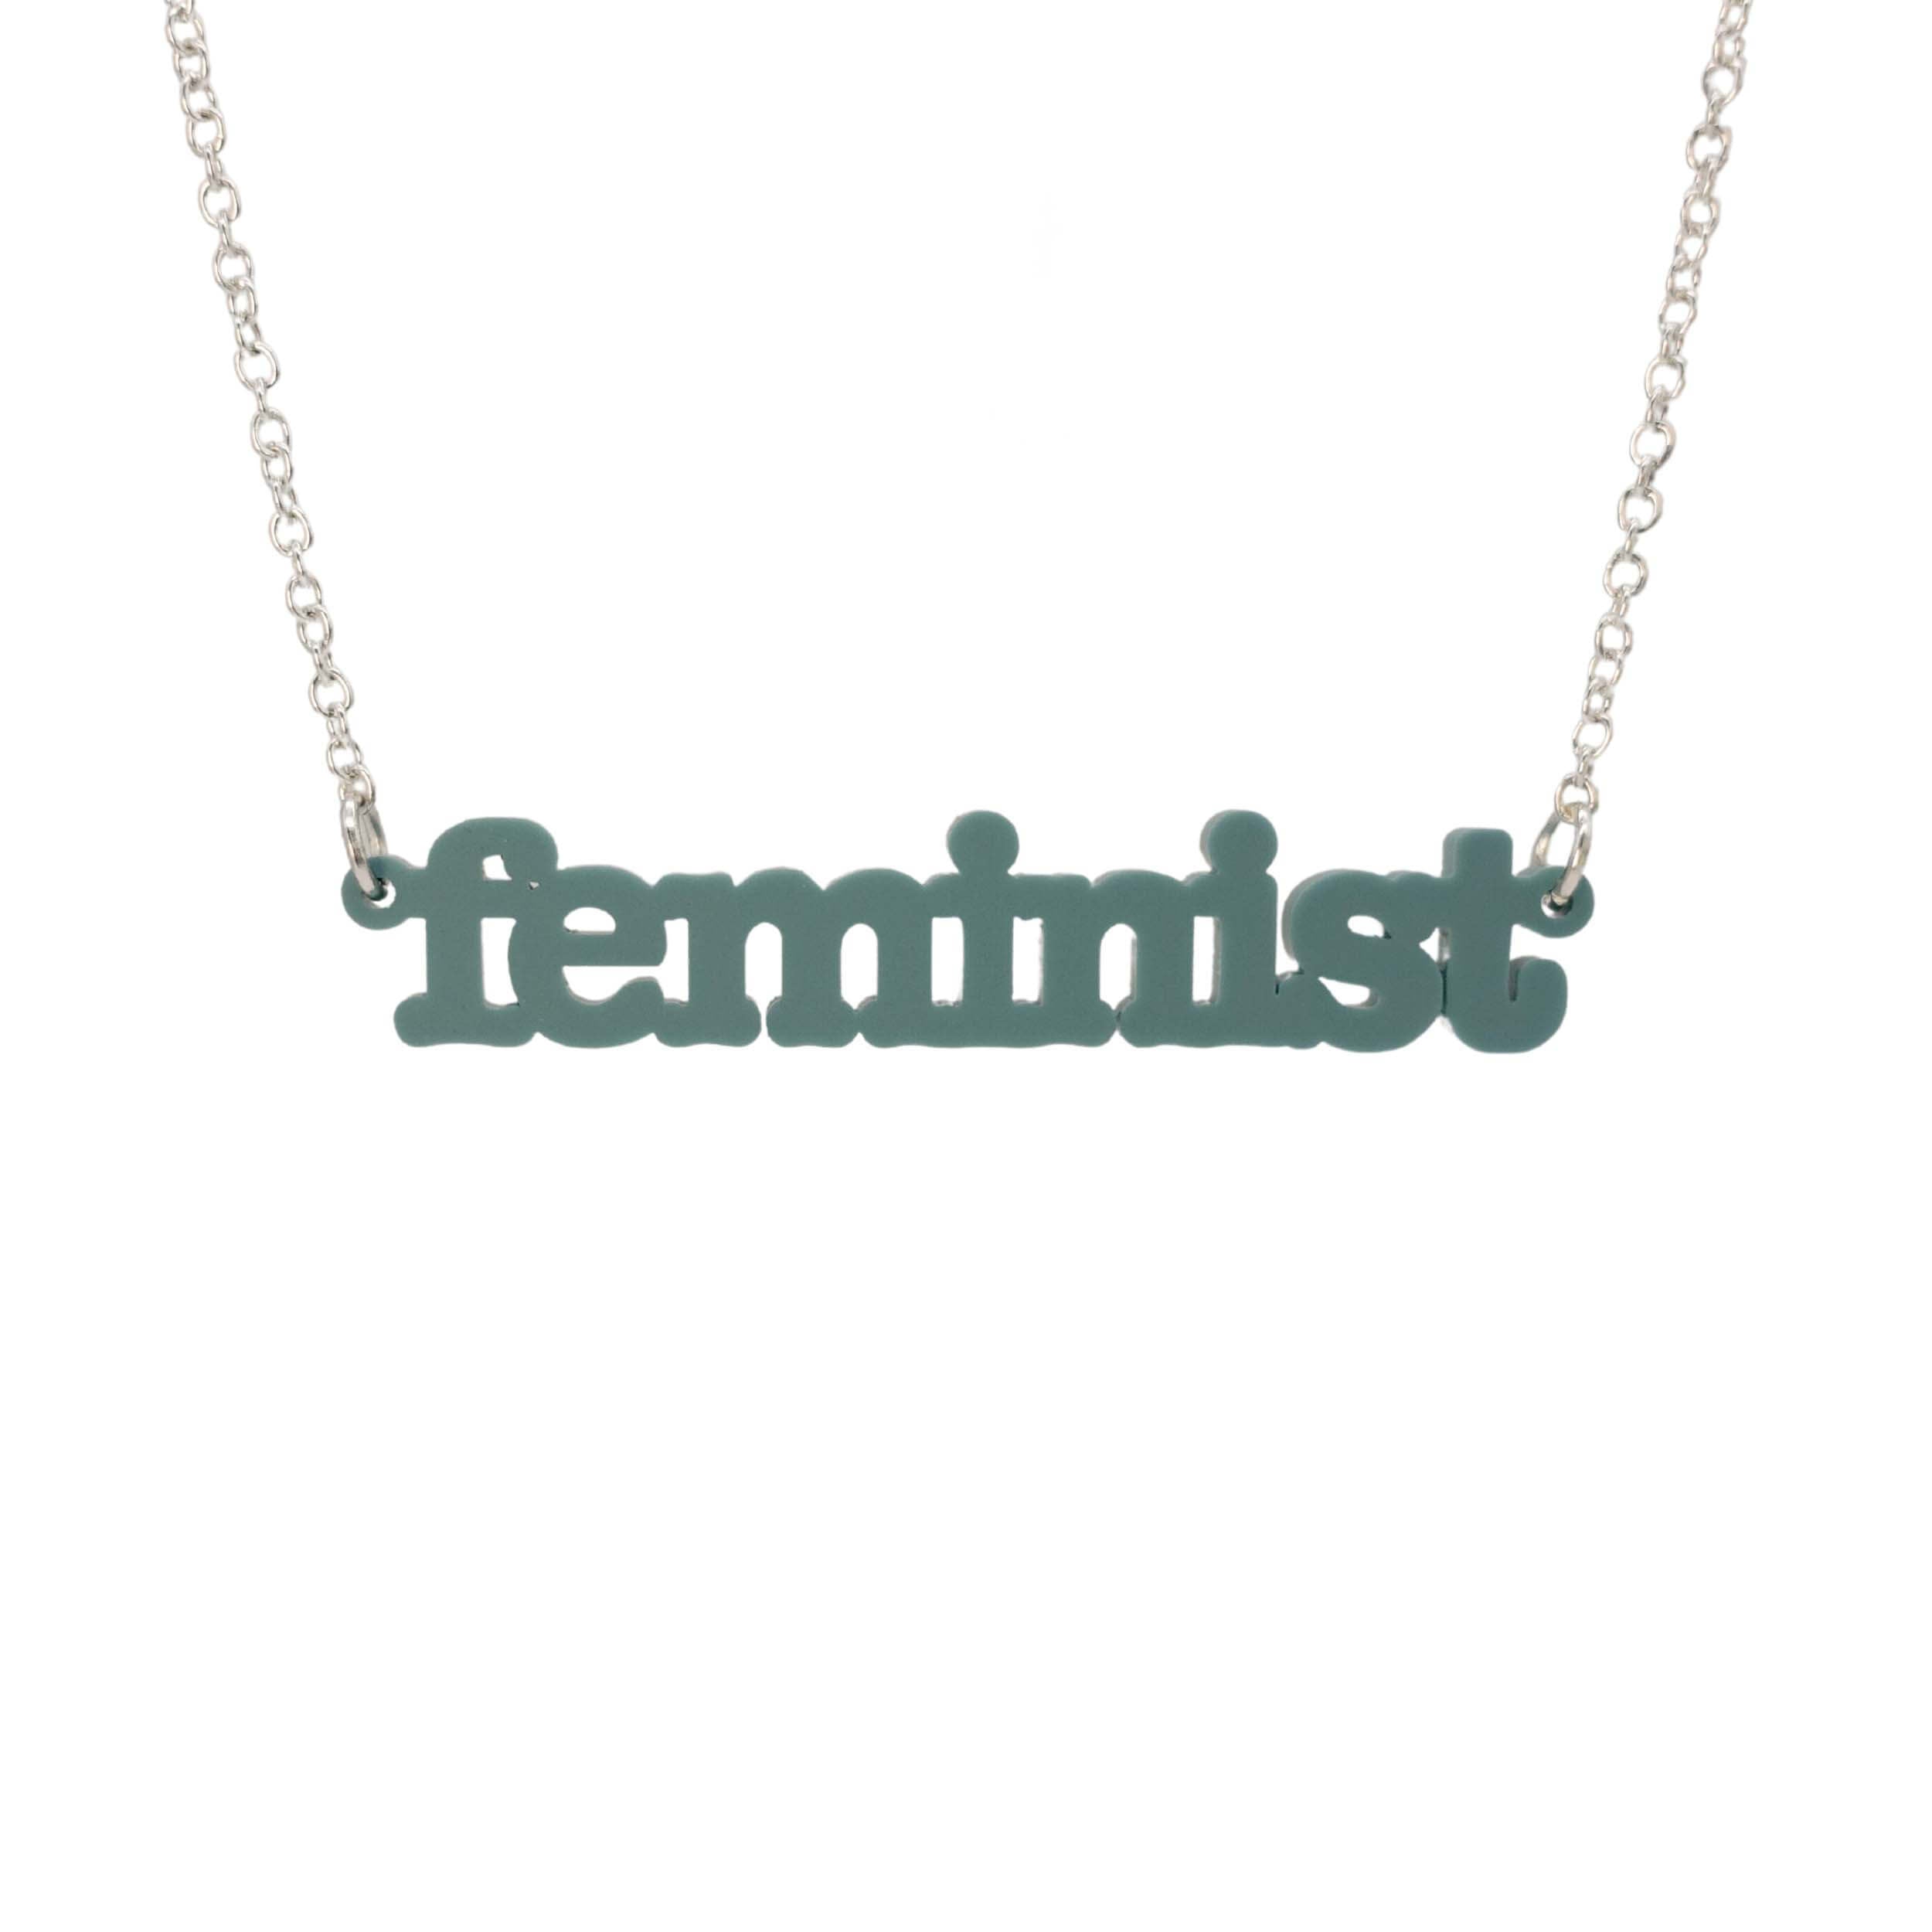 Duck egg green Feminist necklace shown hanging on a white background. 